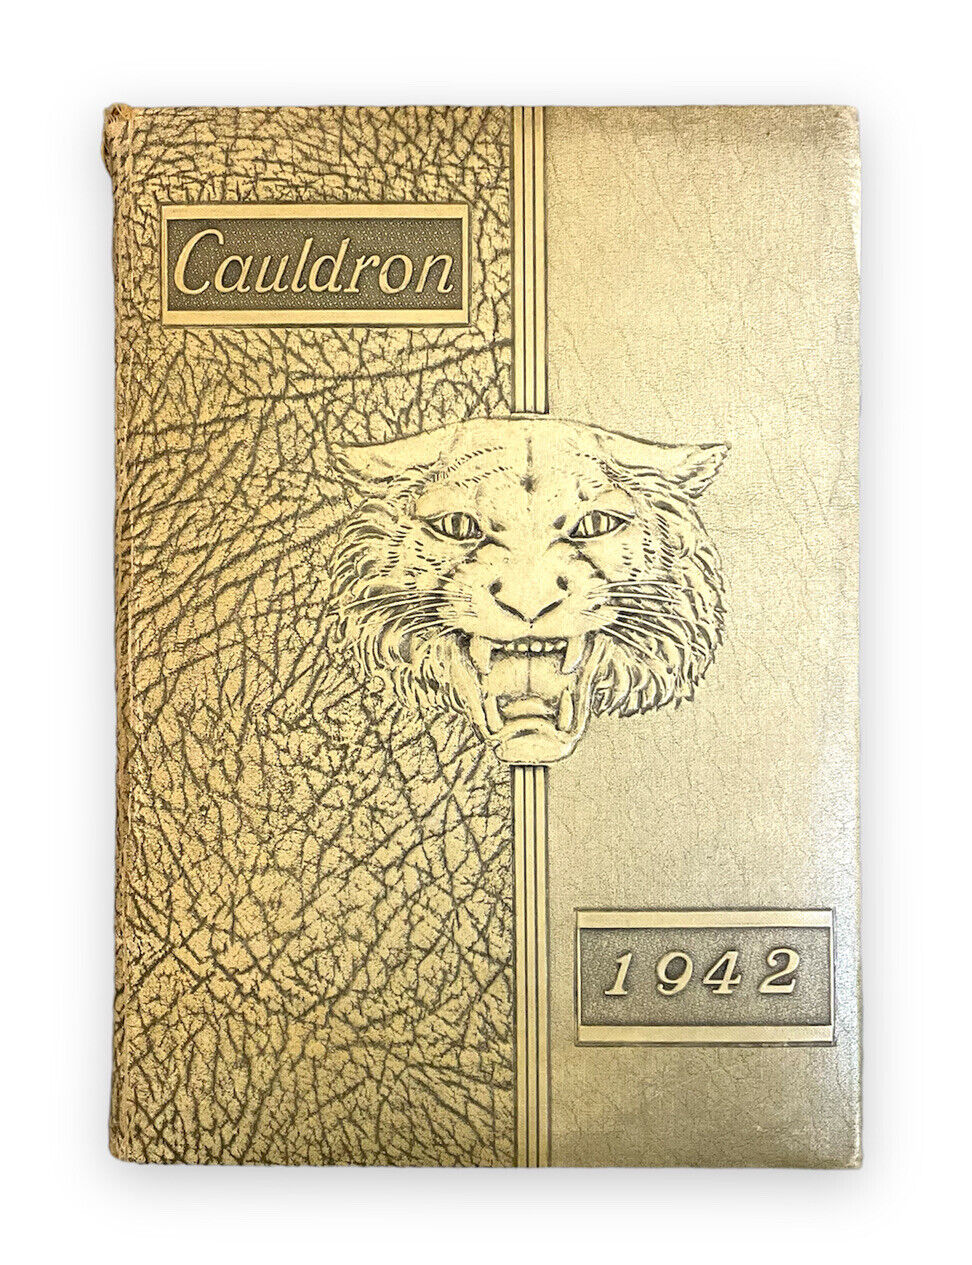 Middletown High School Yearbook 1942 Cauldron Middletown Connecticut Tiger Extra